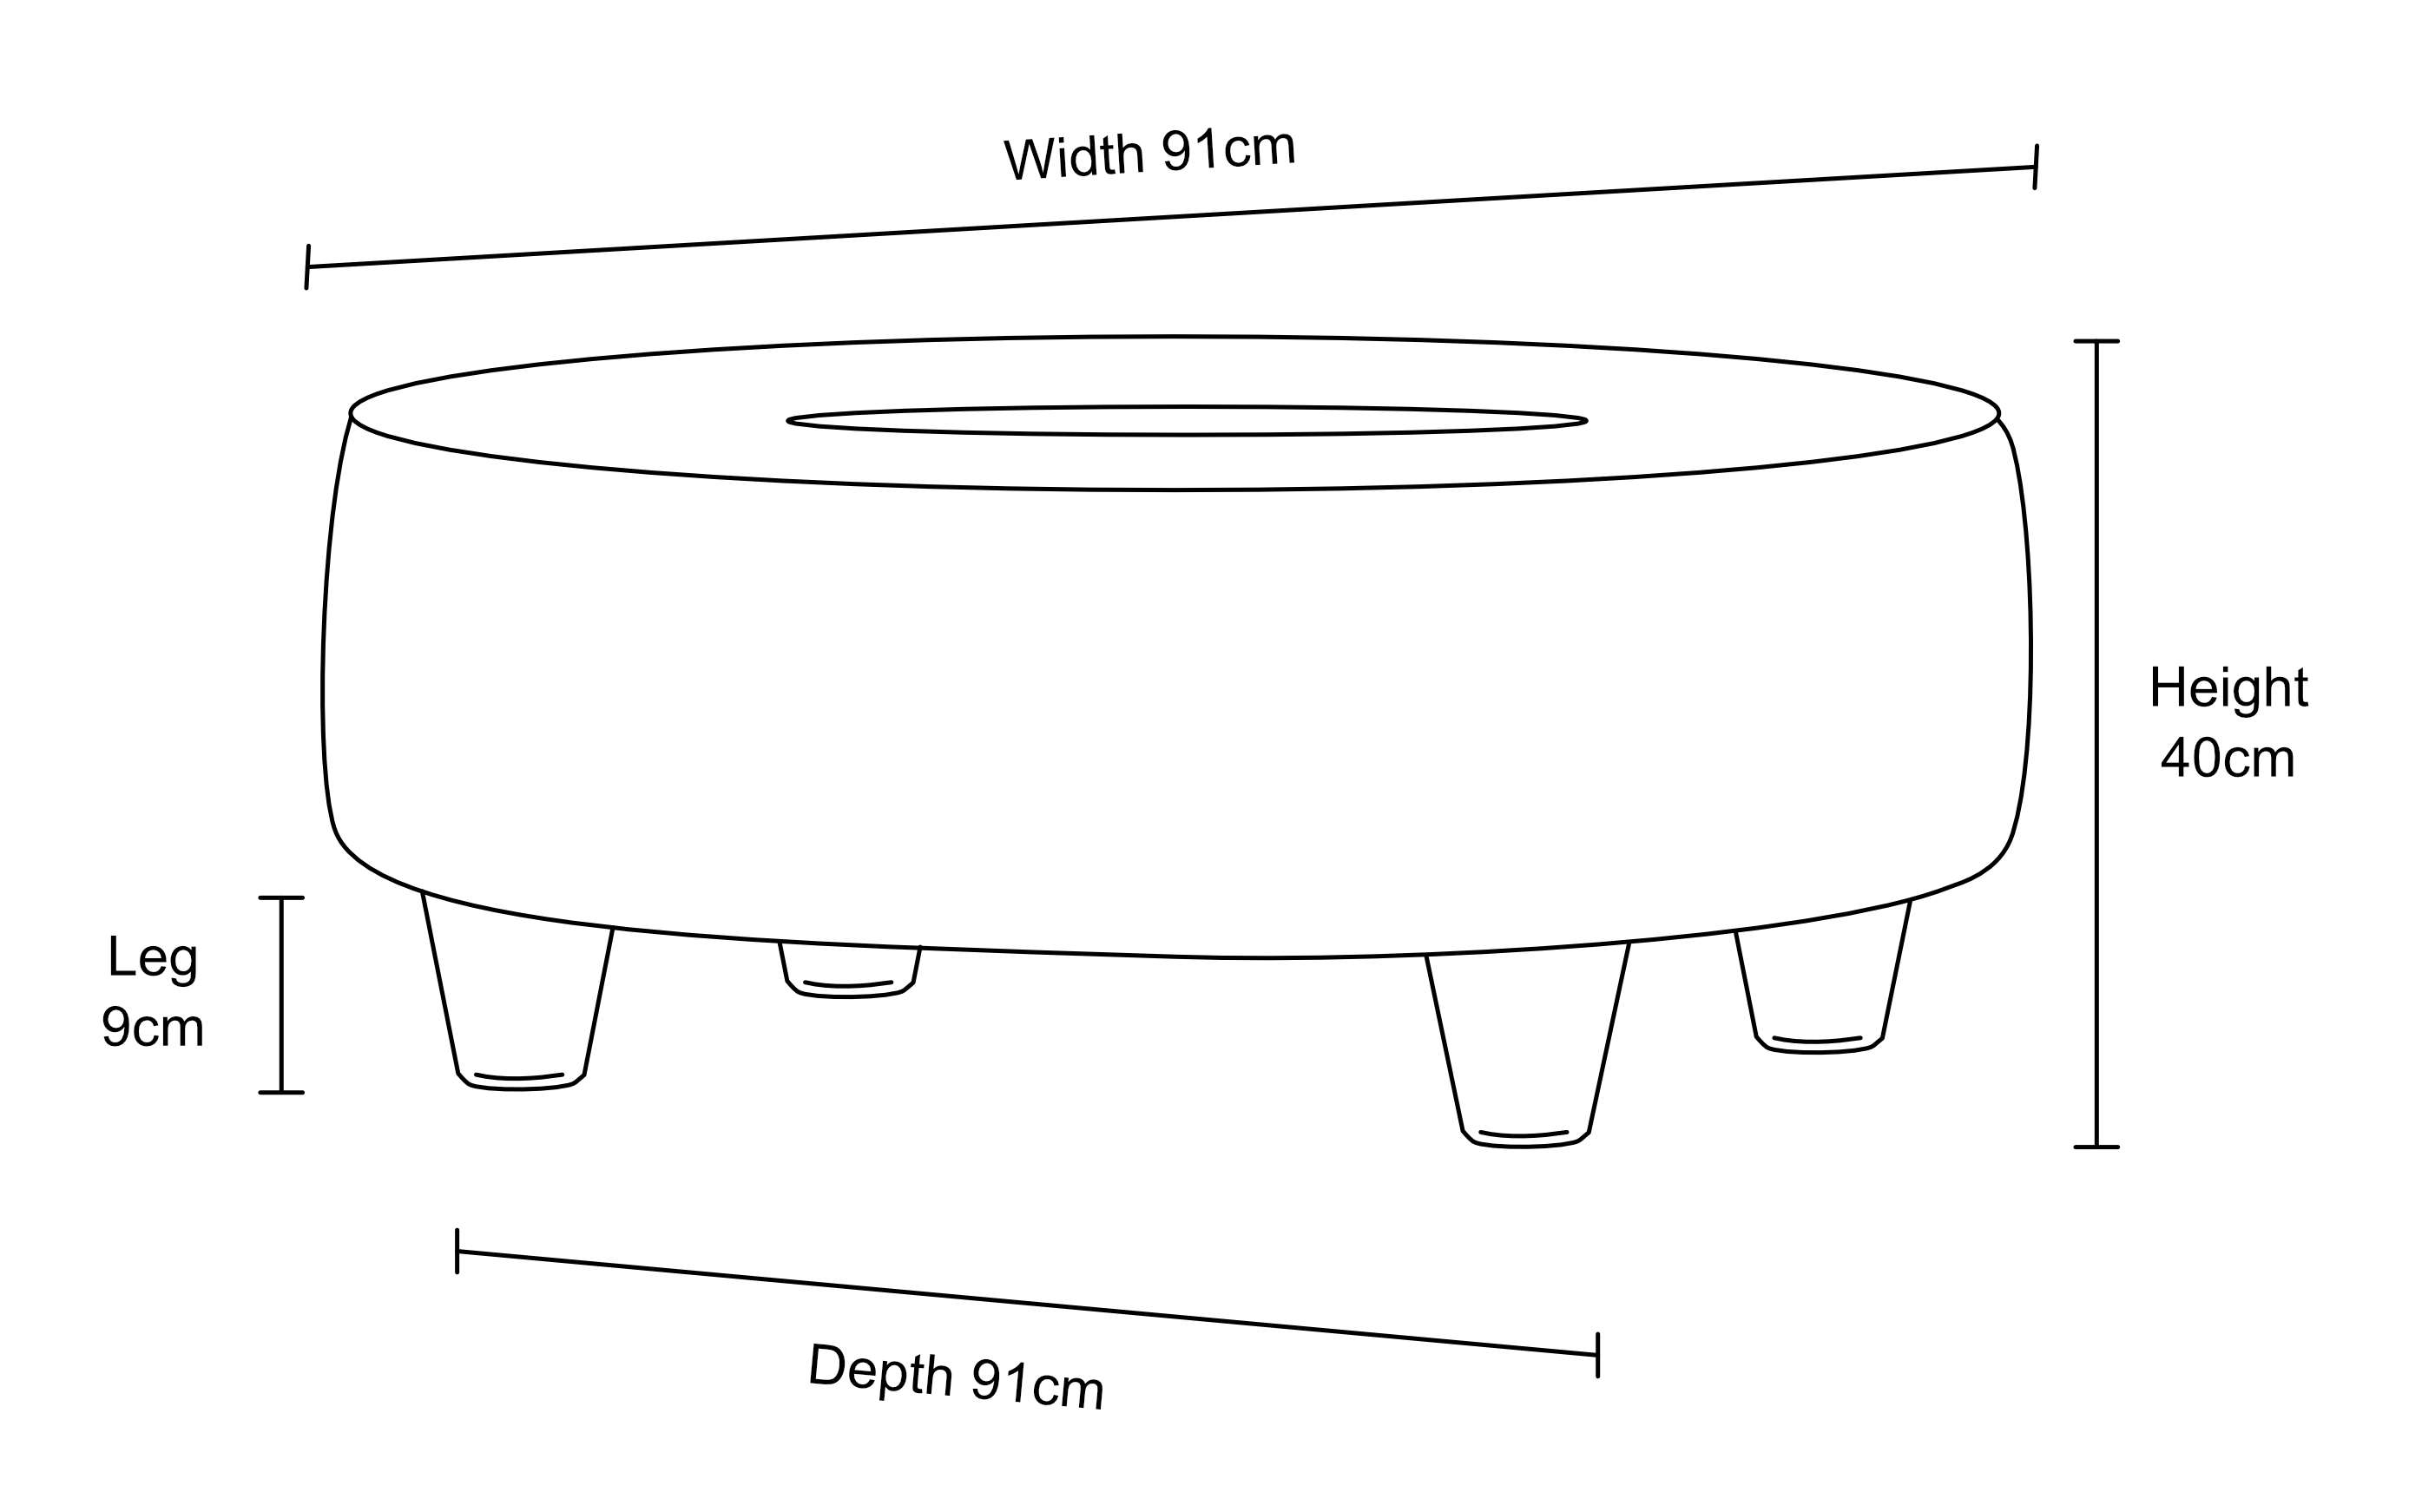 https://www.footstools.co.uk/wp-content/uploads/round-footstool-36x36-dimensions-1.jpg